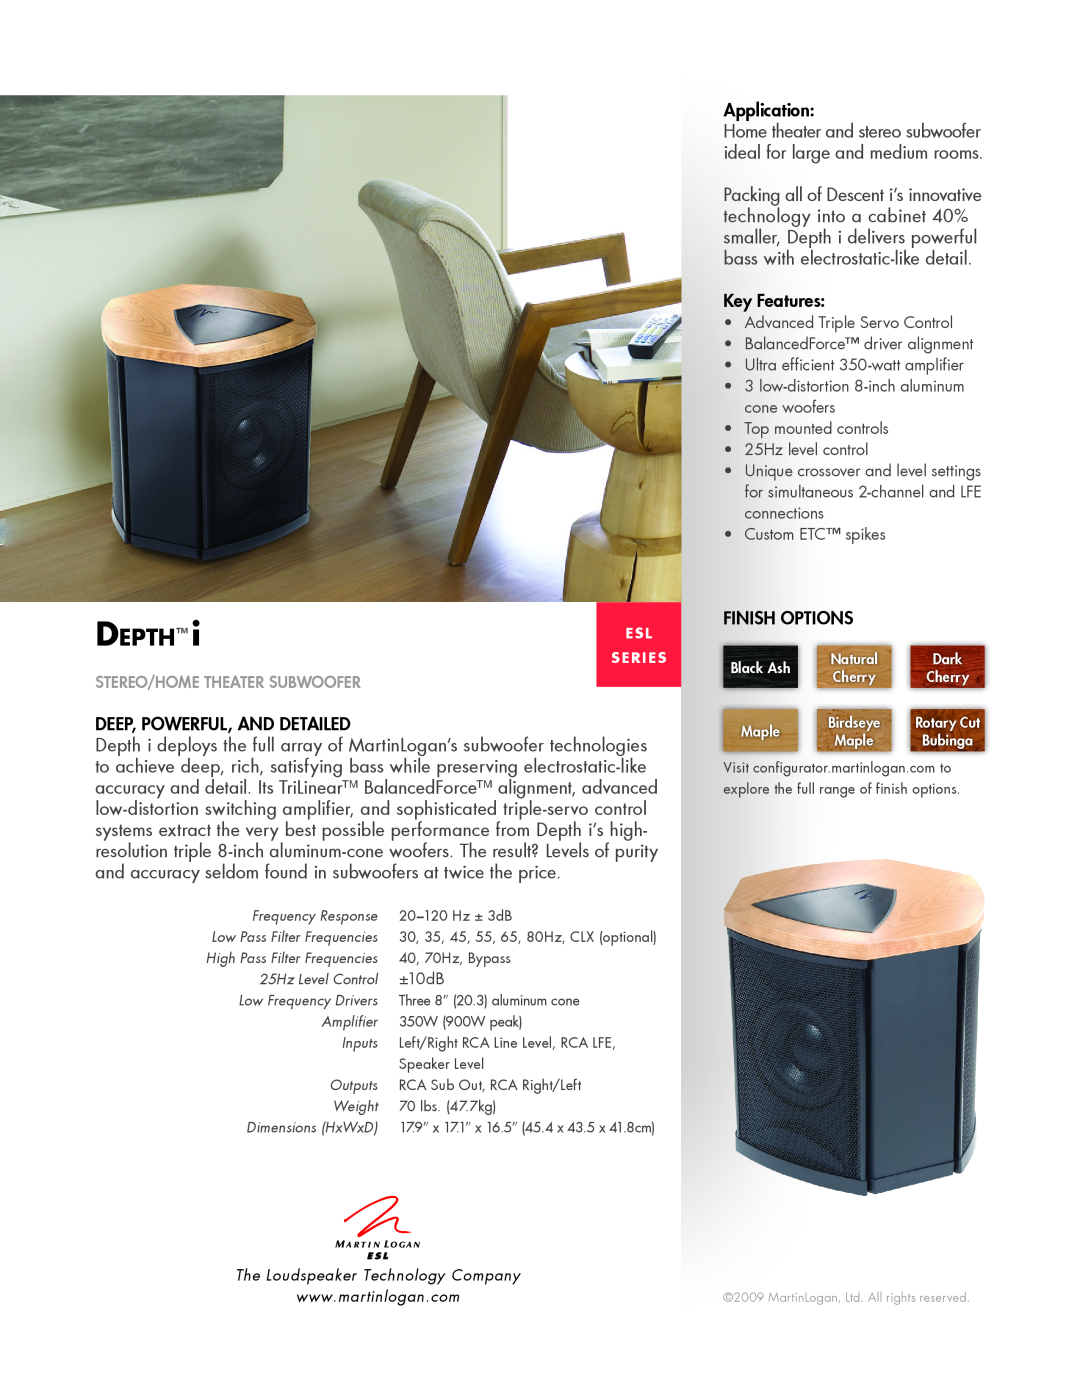 MartinLogan ESL Series dimensions Depth, Deep, Powerful, and Detailed, Application, Key Features, Finish options, ±10dB 